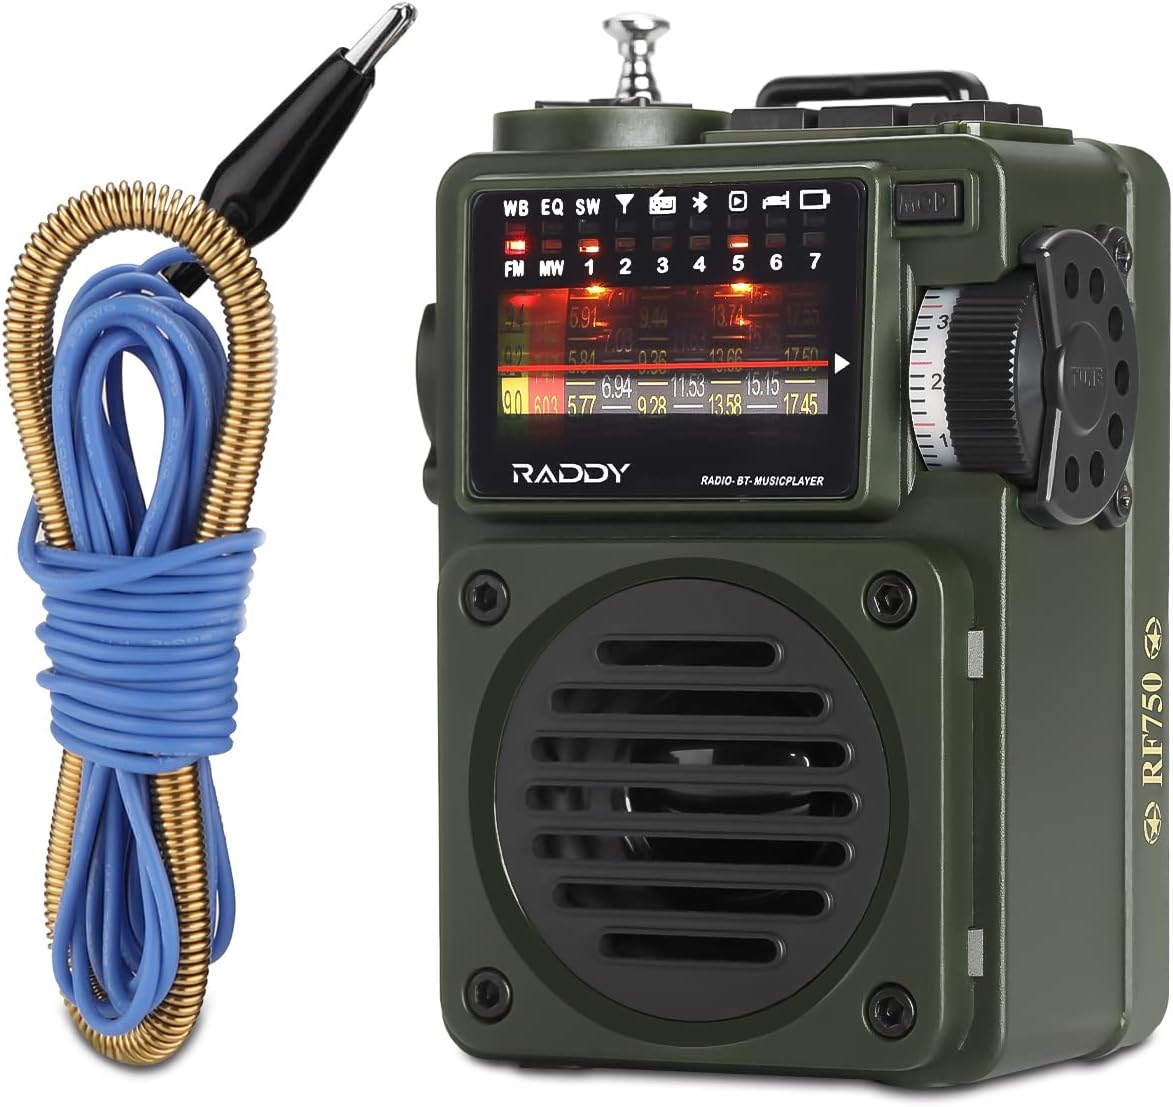 Raddy RF750 Portable Shortwave Radio AM/FM/SW/WB Receiver with NOAA Alerts - Pocket Radio Rechargeable, w/ 9.85 Ft Wire Antenna